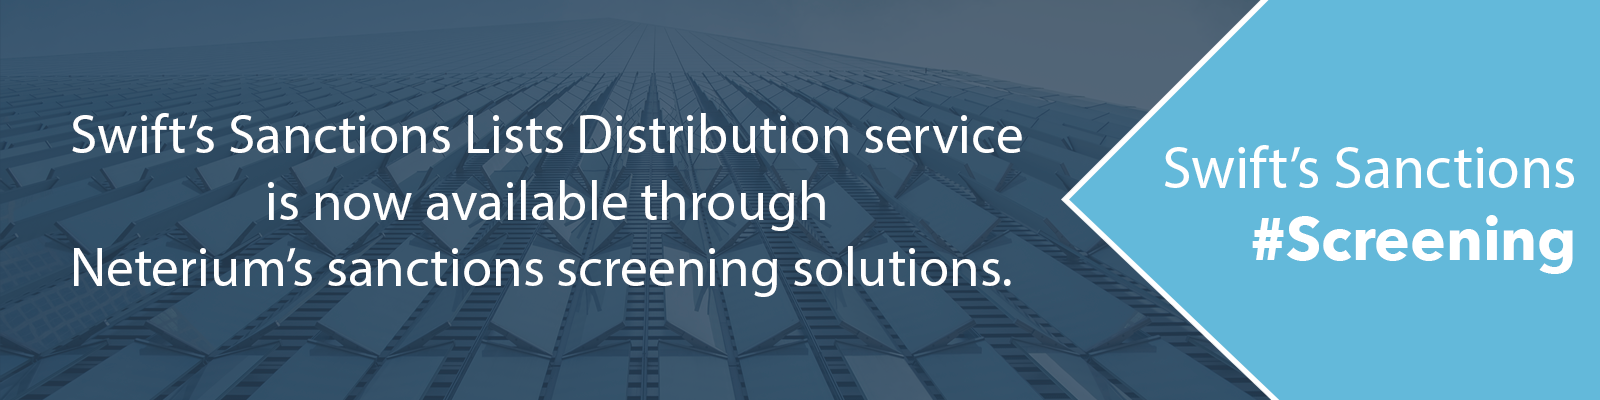 Swift’s Sanctions Lists Distribution service is now available through Neterium’s sanctions screening solutions